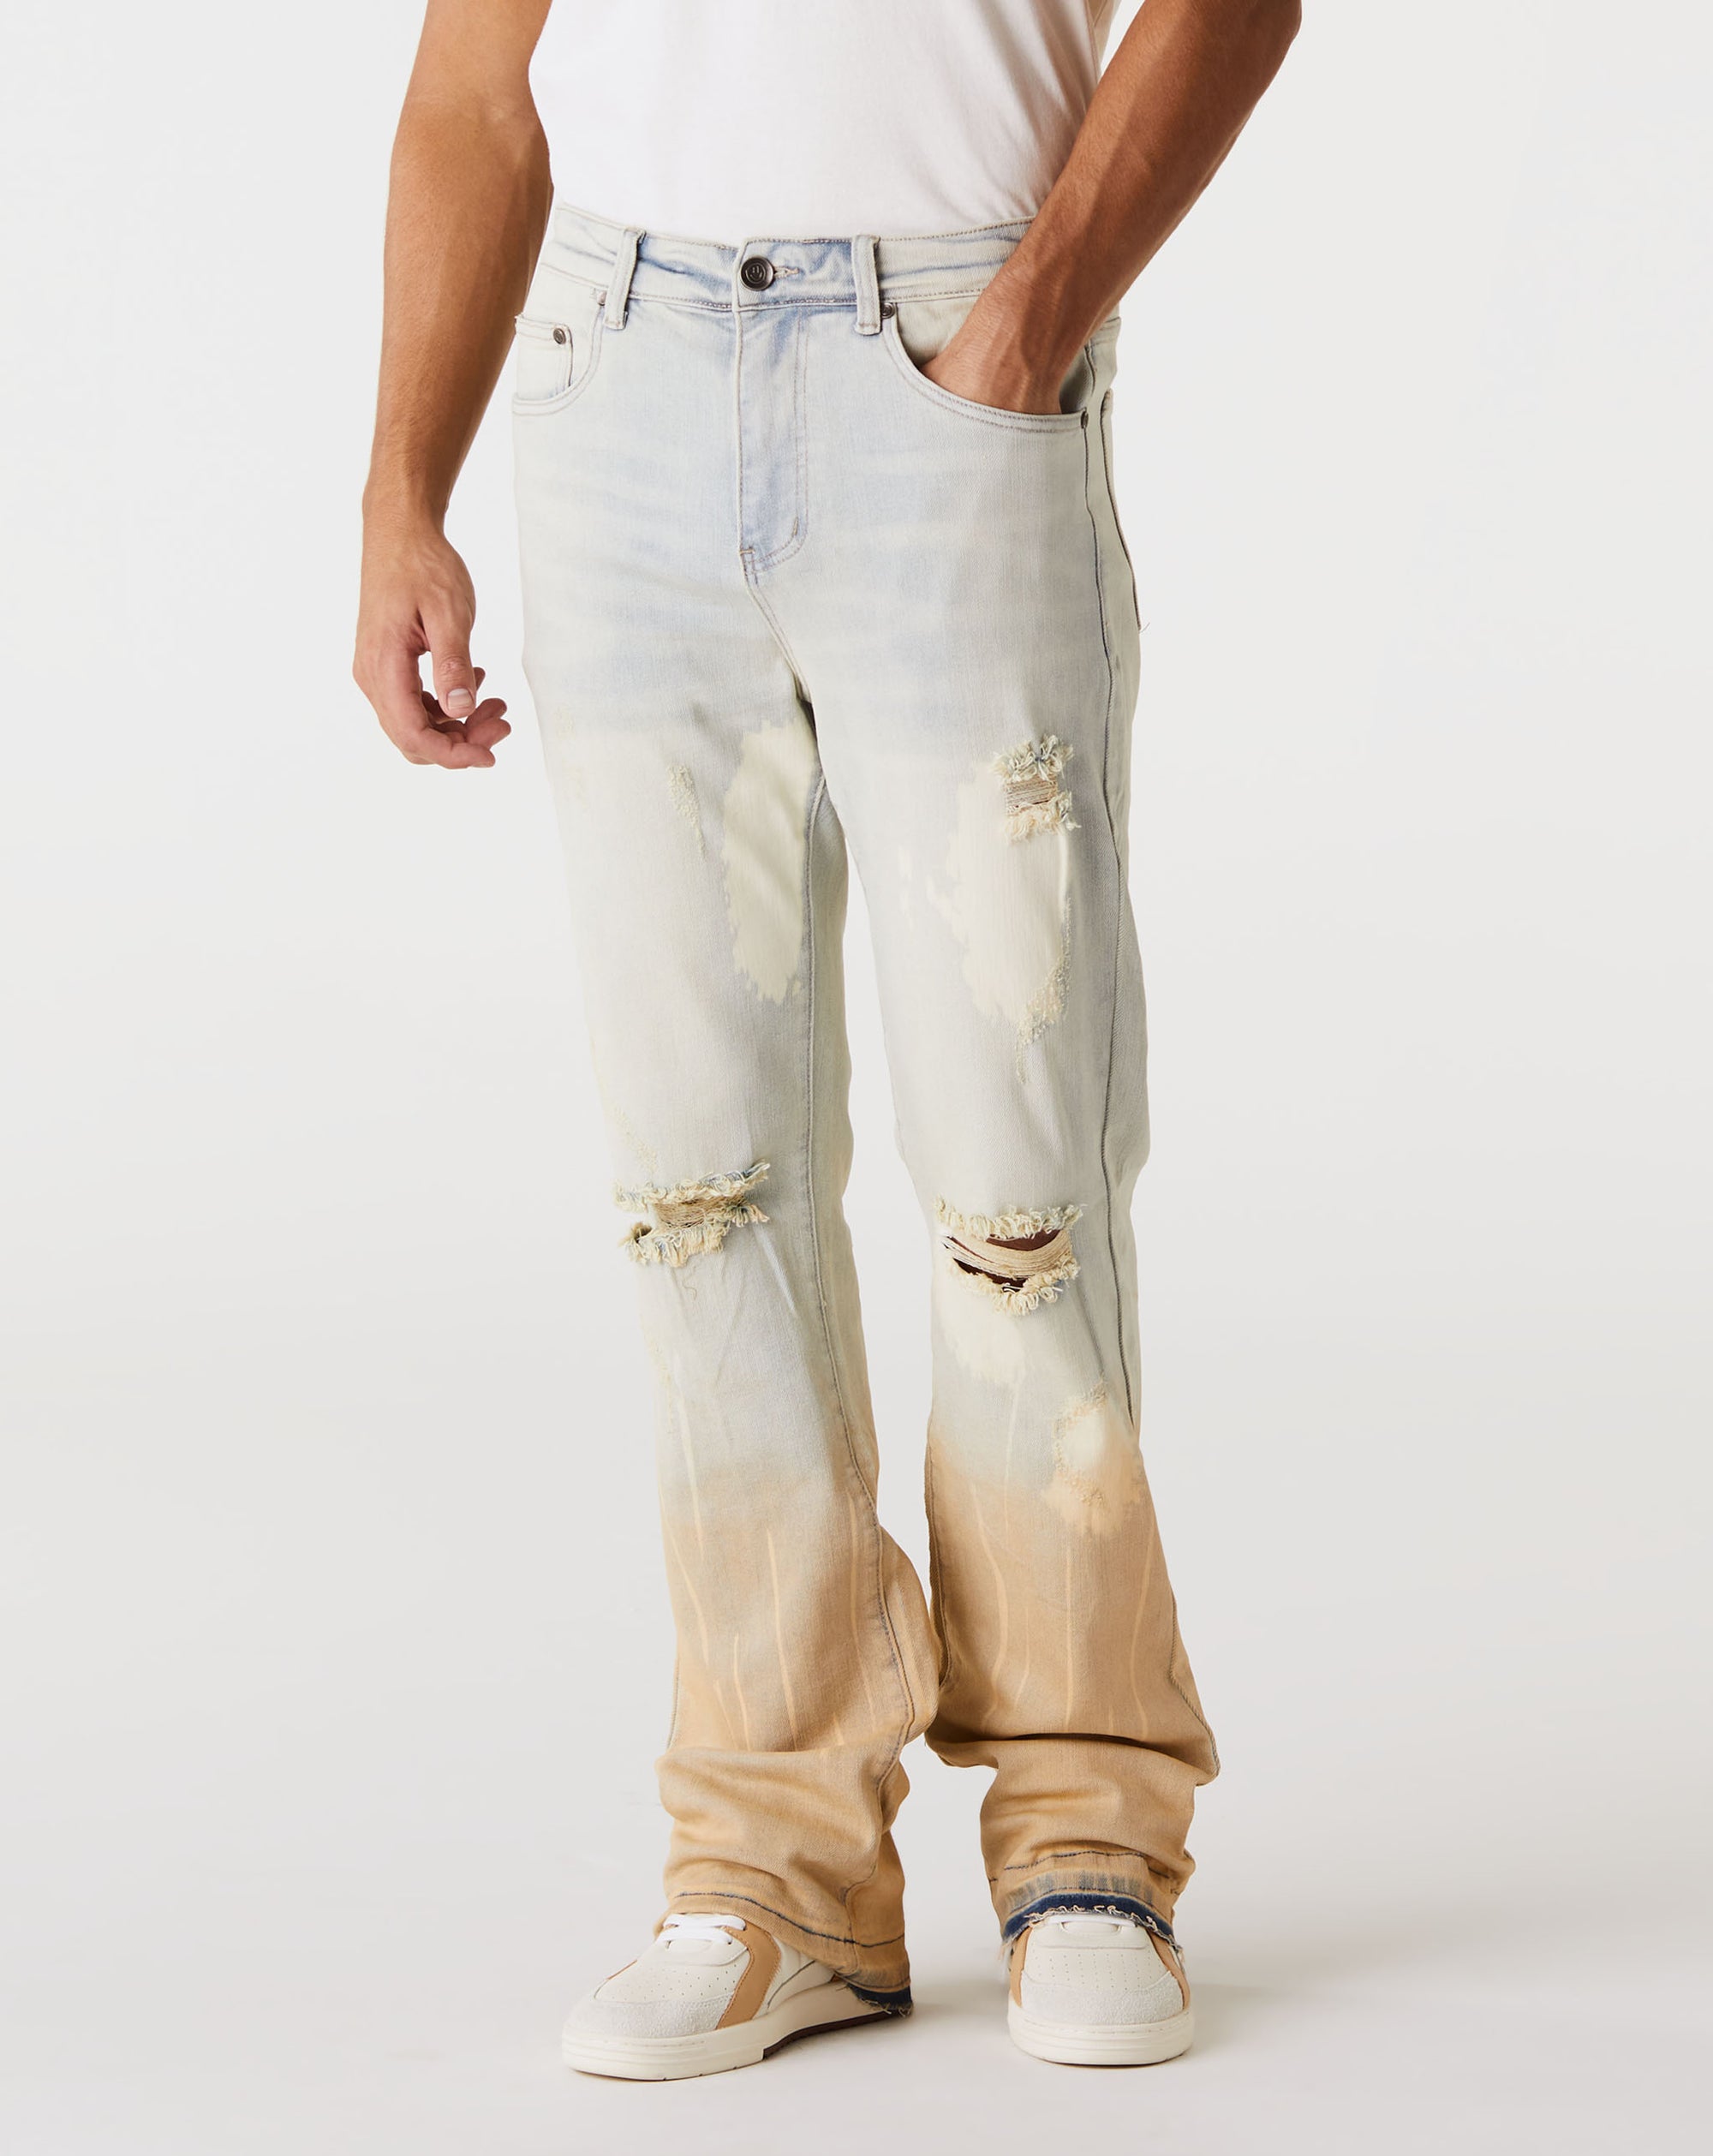 Sugarhill "Saturn" Stacked Jeans - Rule of Next Apparel